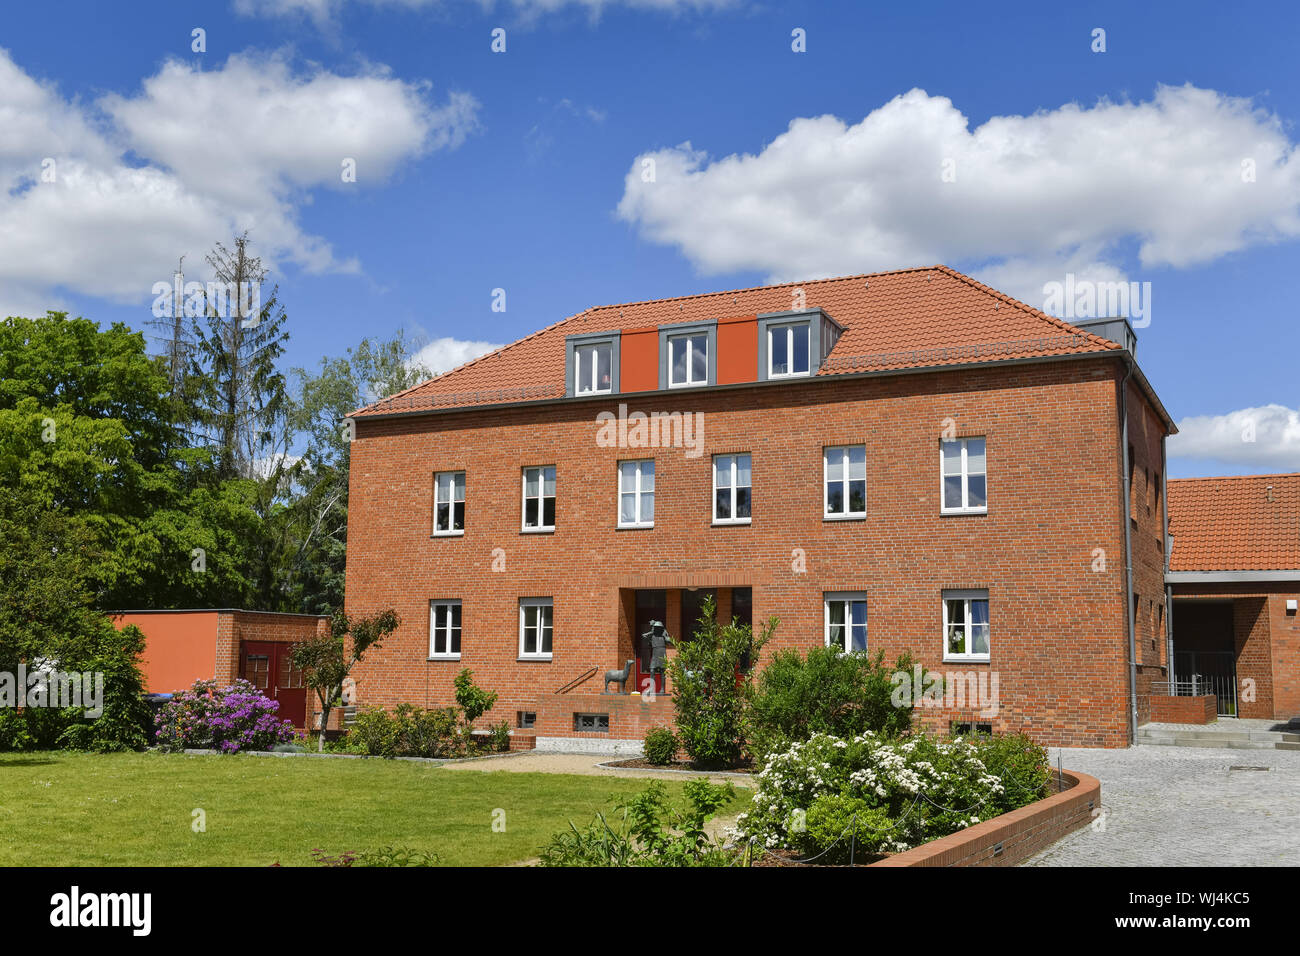 View, architecture, Outside, Outside, outside view, outside view, Berlin, like a Christian, Christian, Christian, Dahlem, Dahlemer, Germany, building, Stock Photo